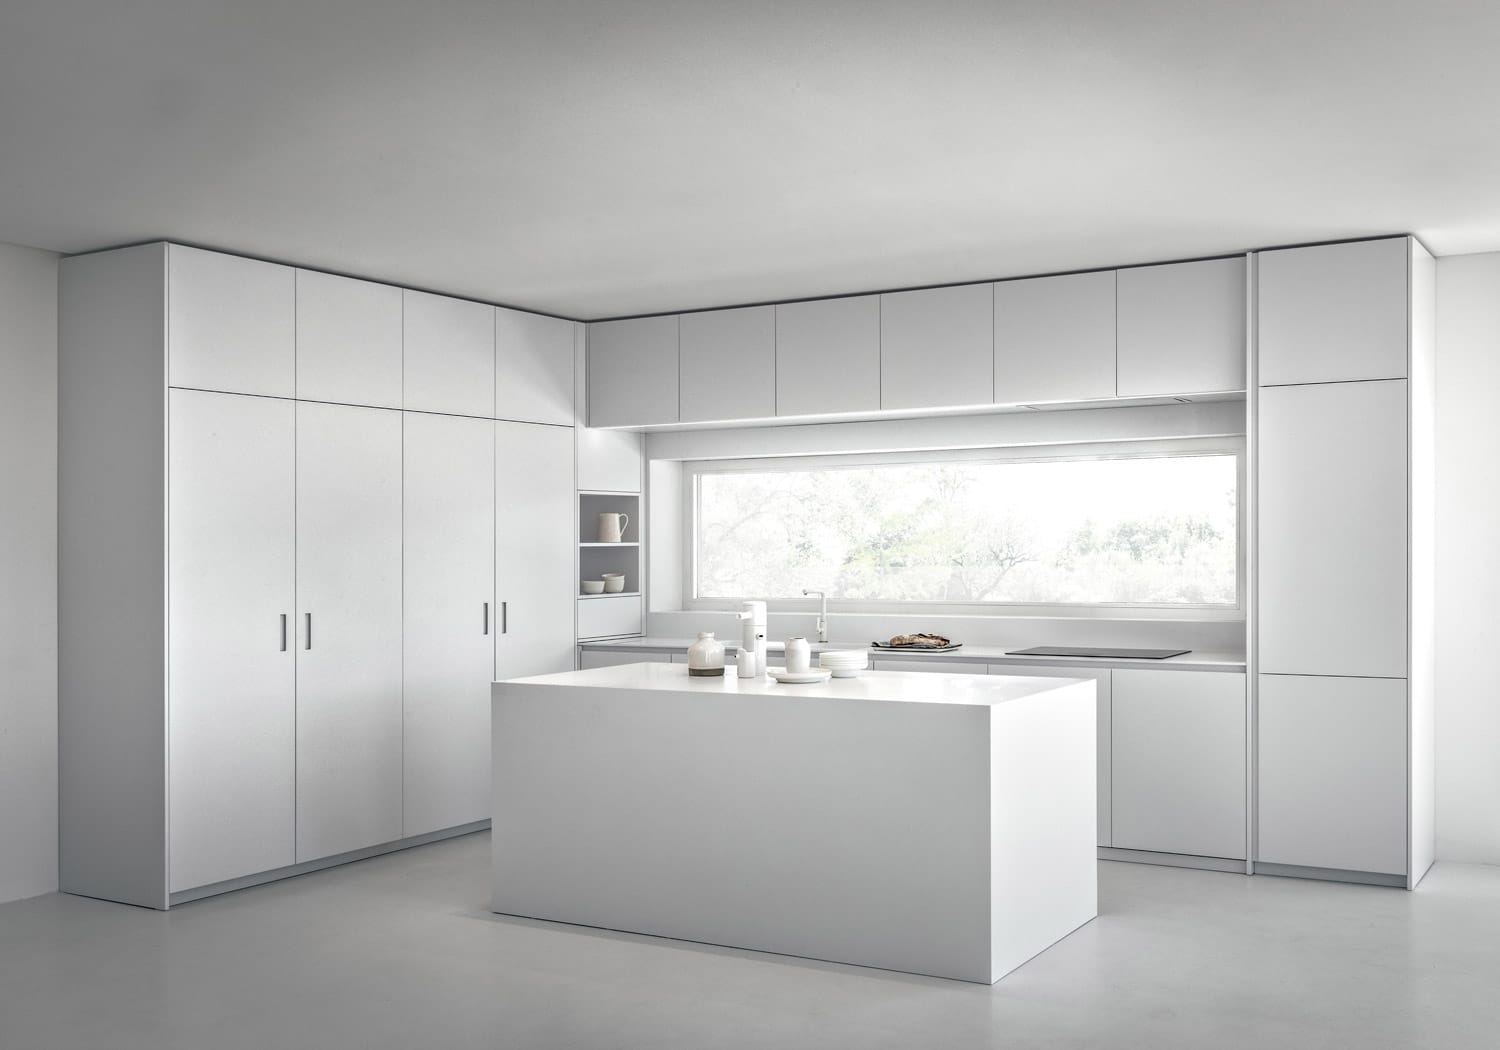 The purity of white was used in this design to create an aesthetically graceful and luminous kitchen. 